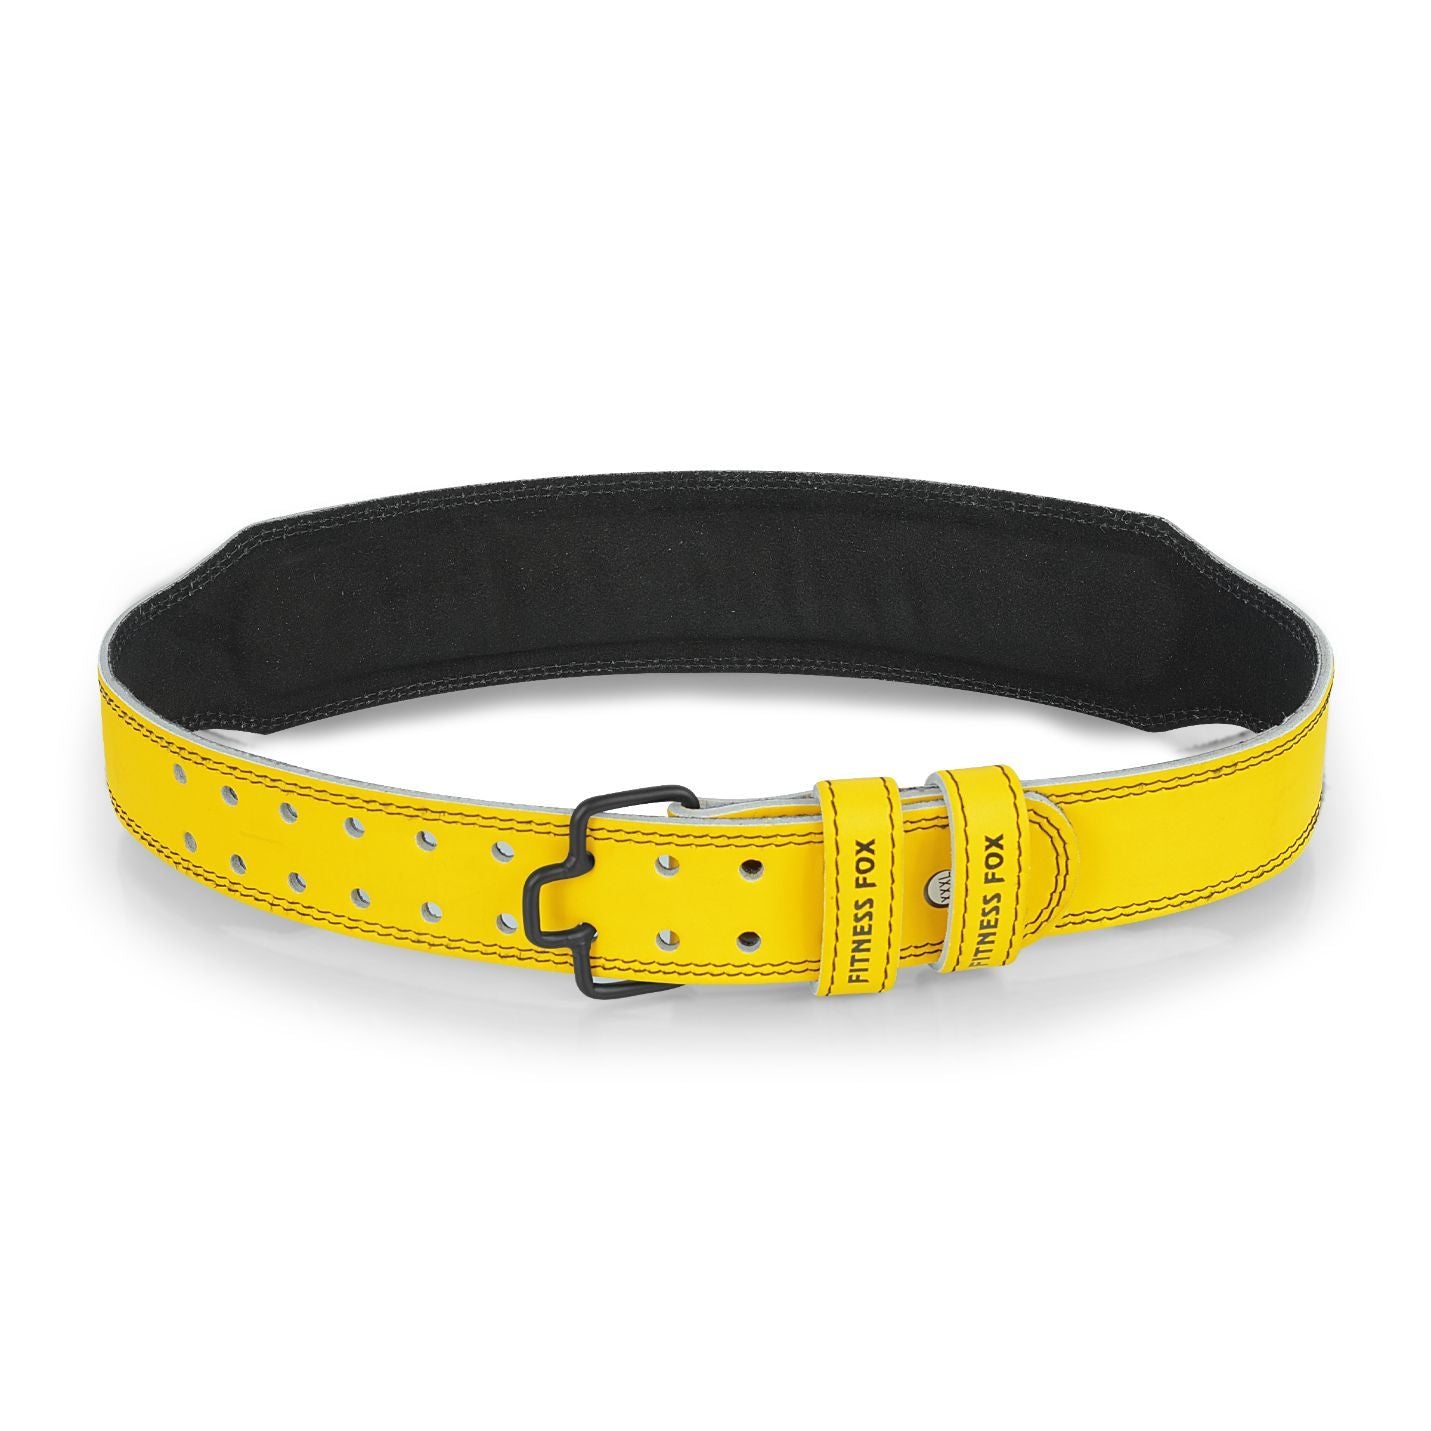 Spartan 4 Inch Quick Release Gym Weightlifting Training Belt (Yellow)